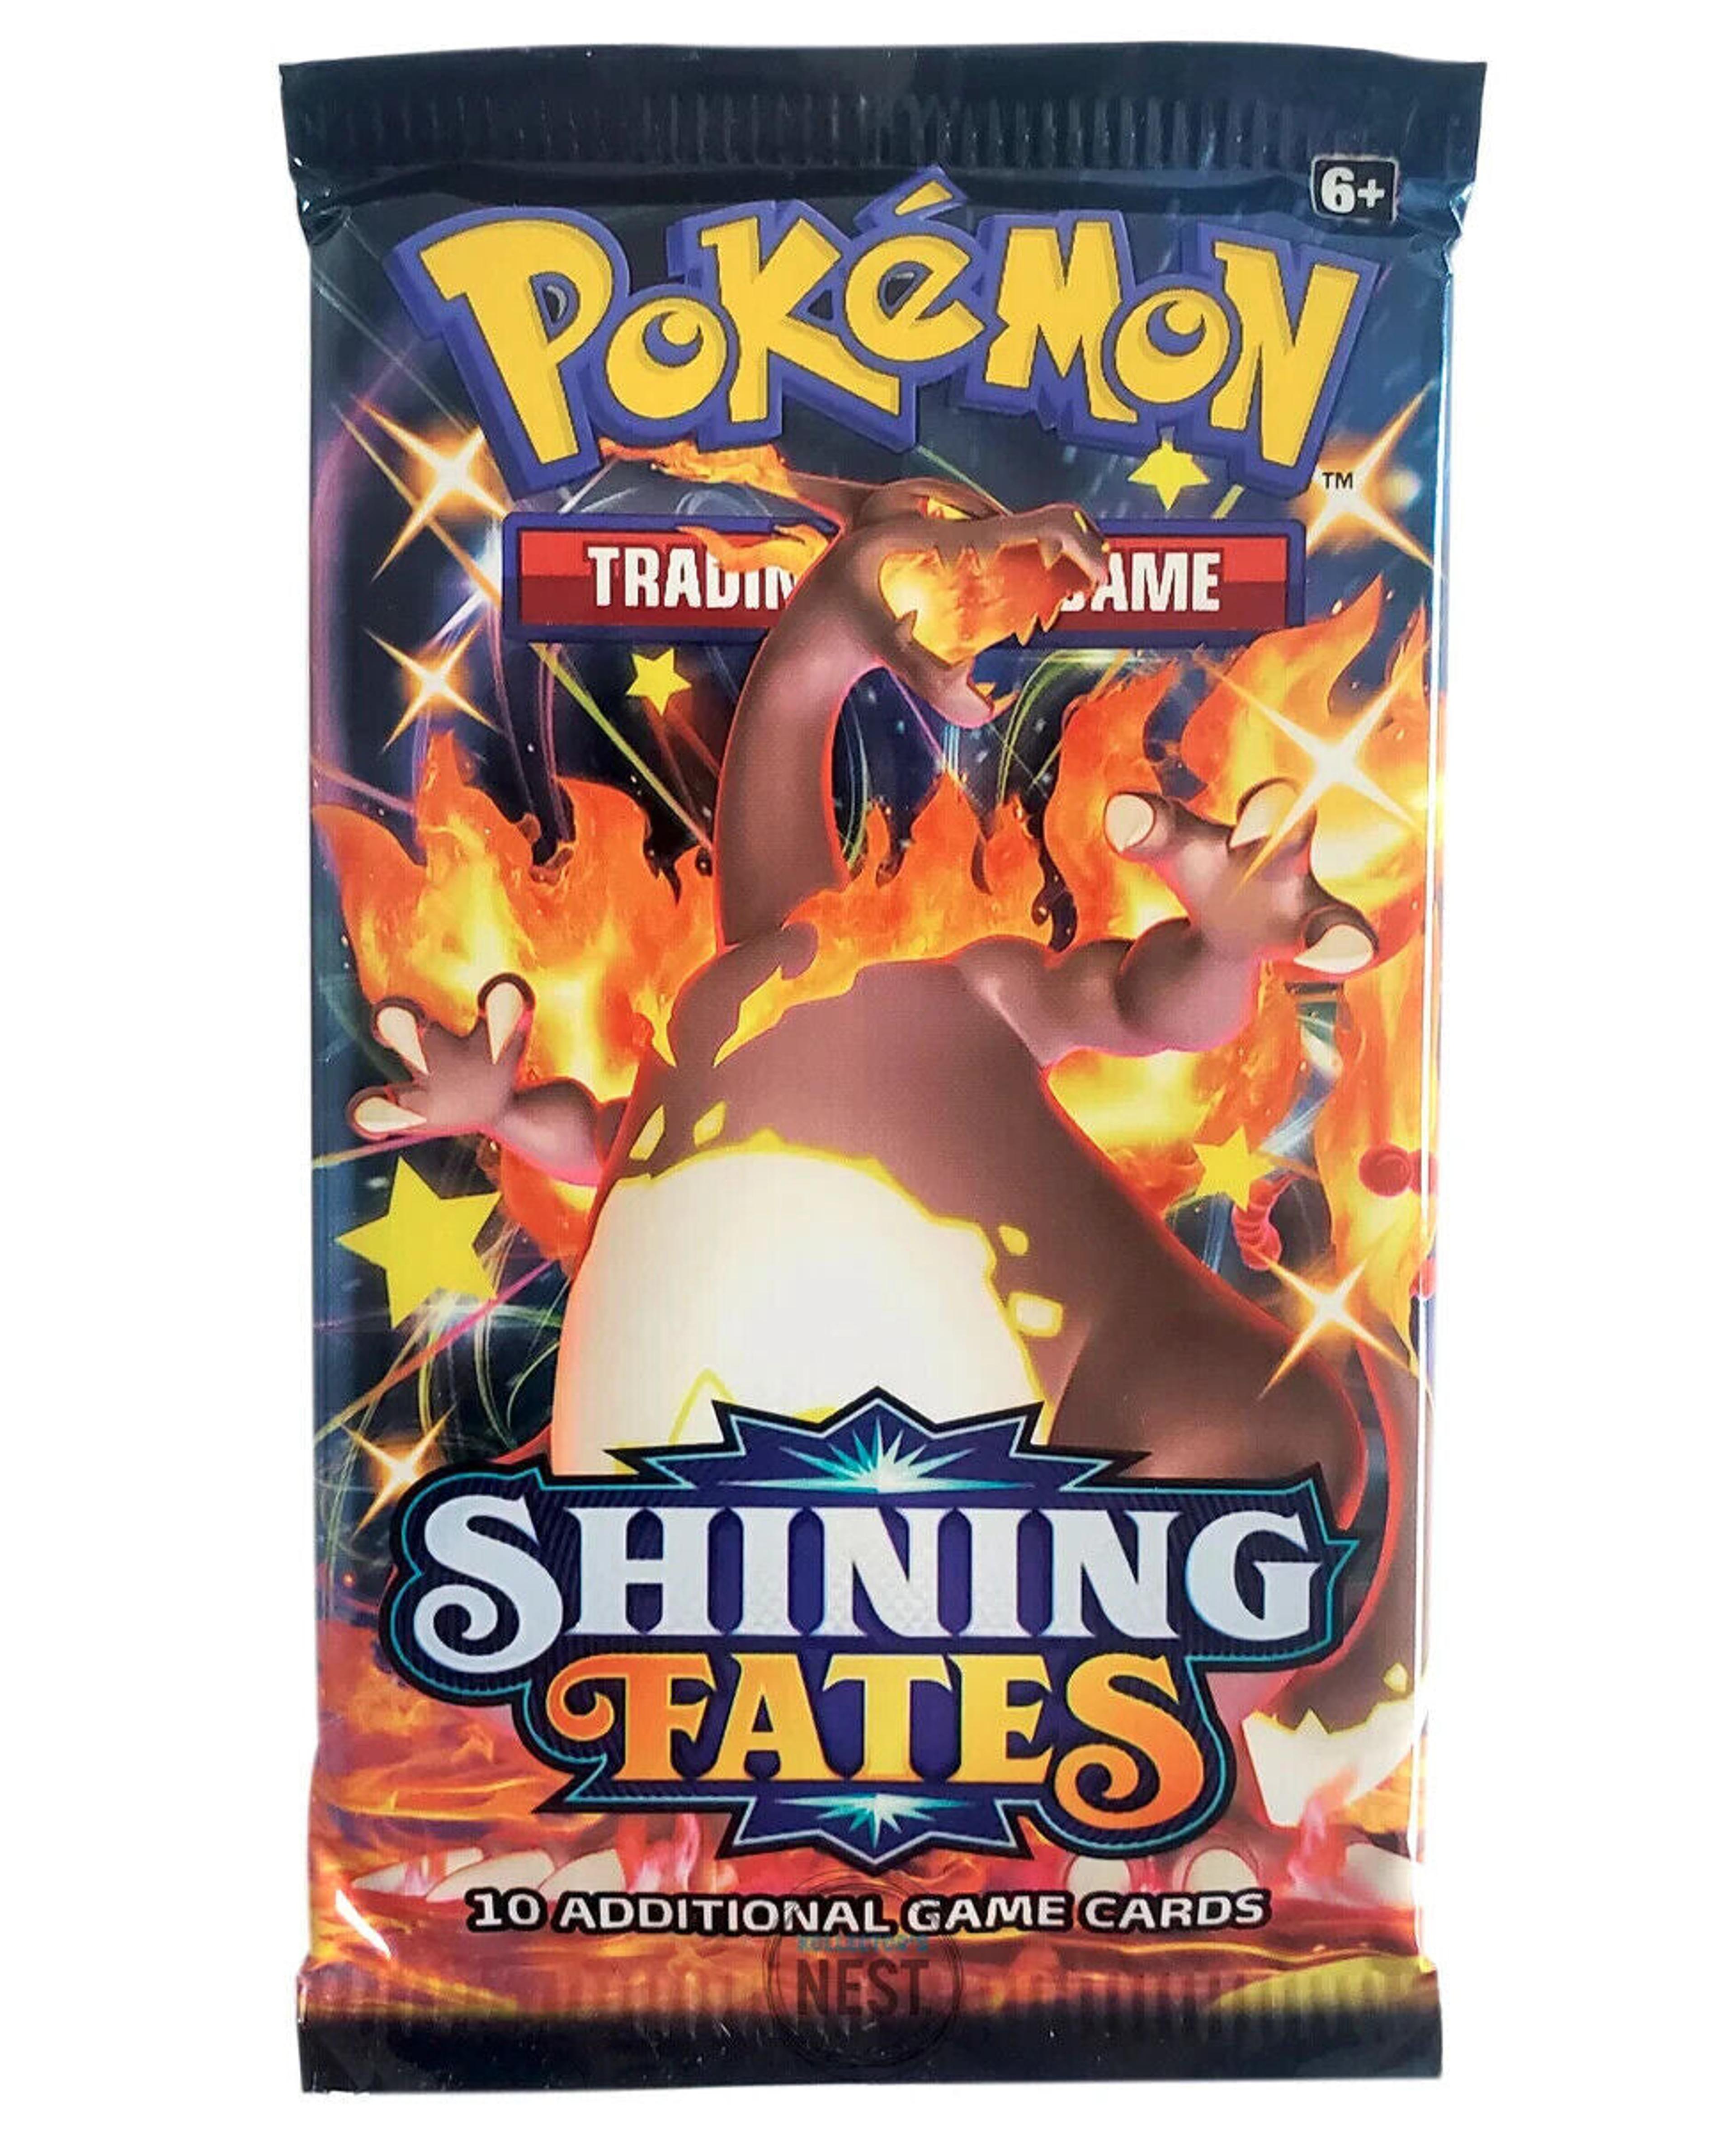 Pokemon TCG Shining Fates Booster Pack